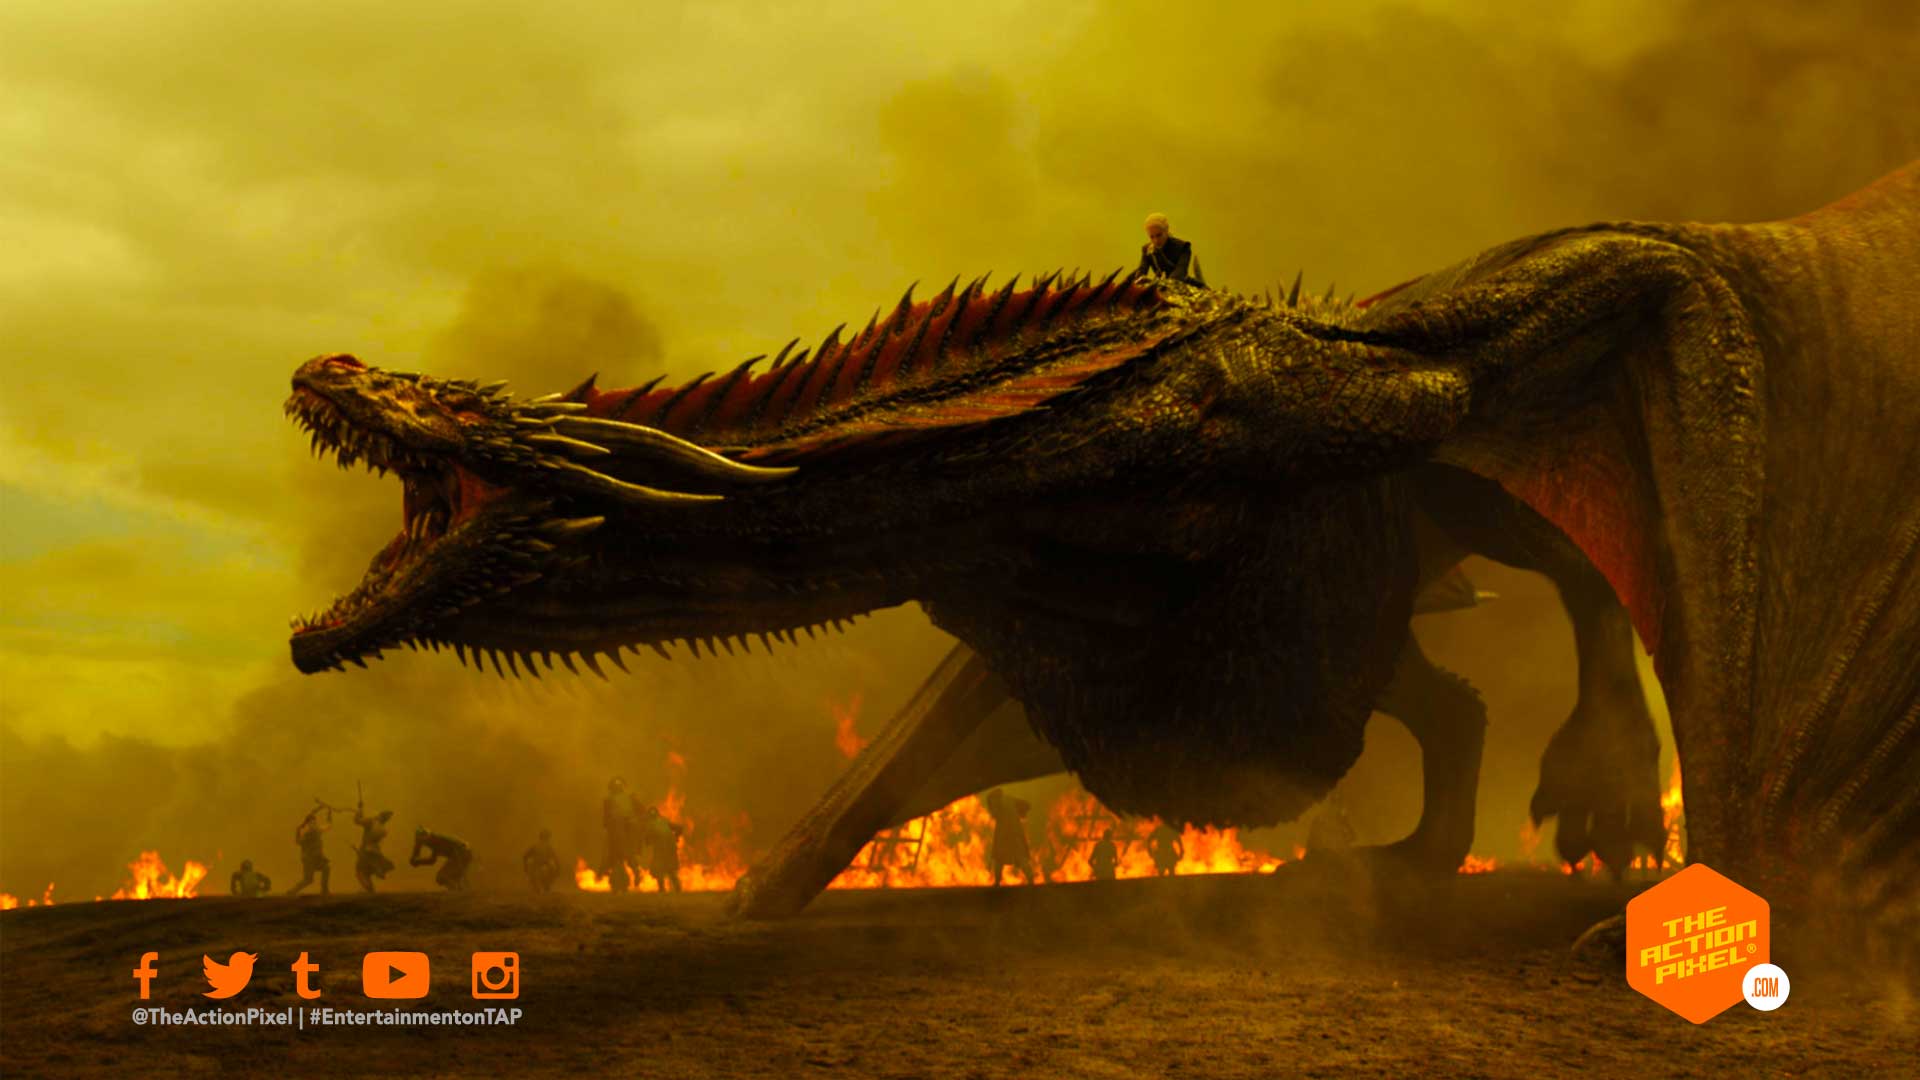 house of the dragon, fire and blood, hbo, hbo max,game of thrones, featured, entertainment on tap,